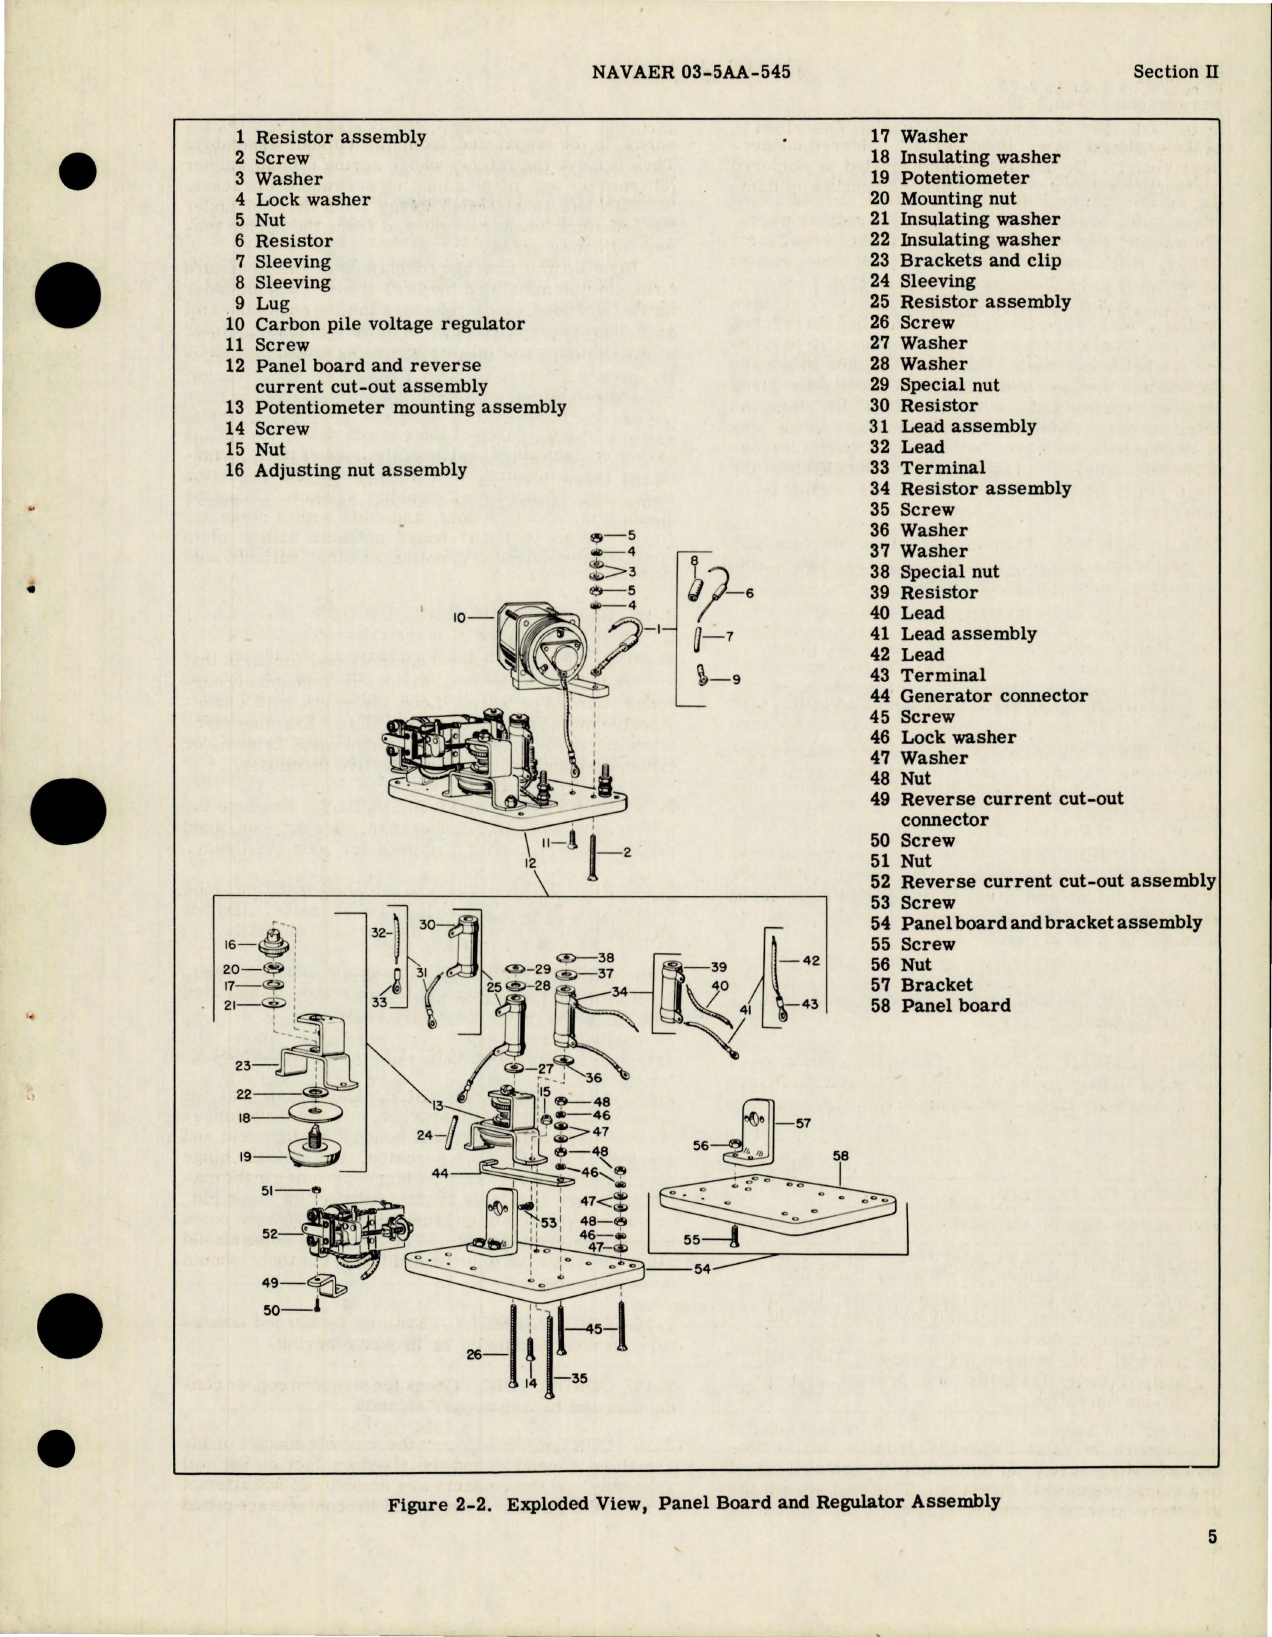 Sample page 7 from AirCorps Library document: Overhaul Instructions for Generator Control Panel - Type 1202-16-A